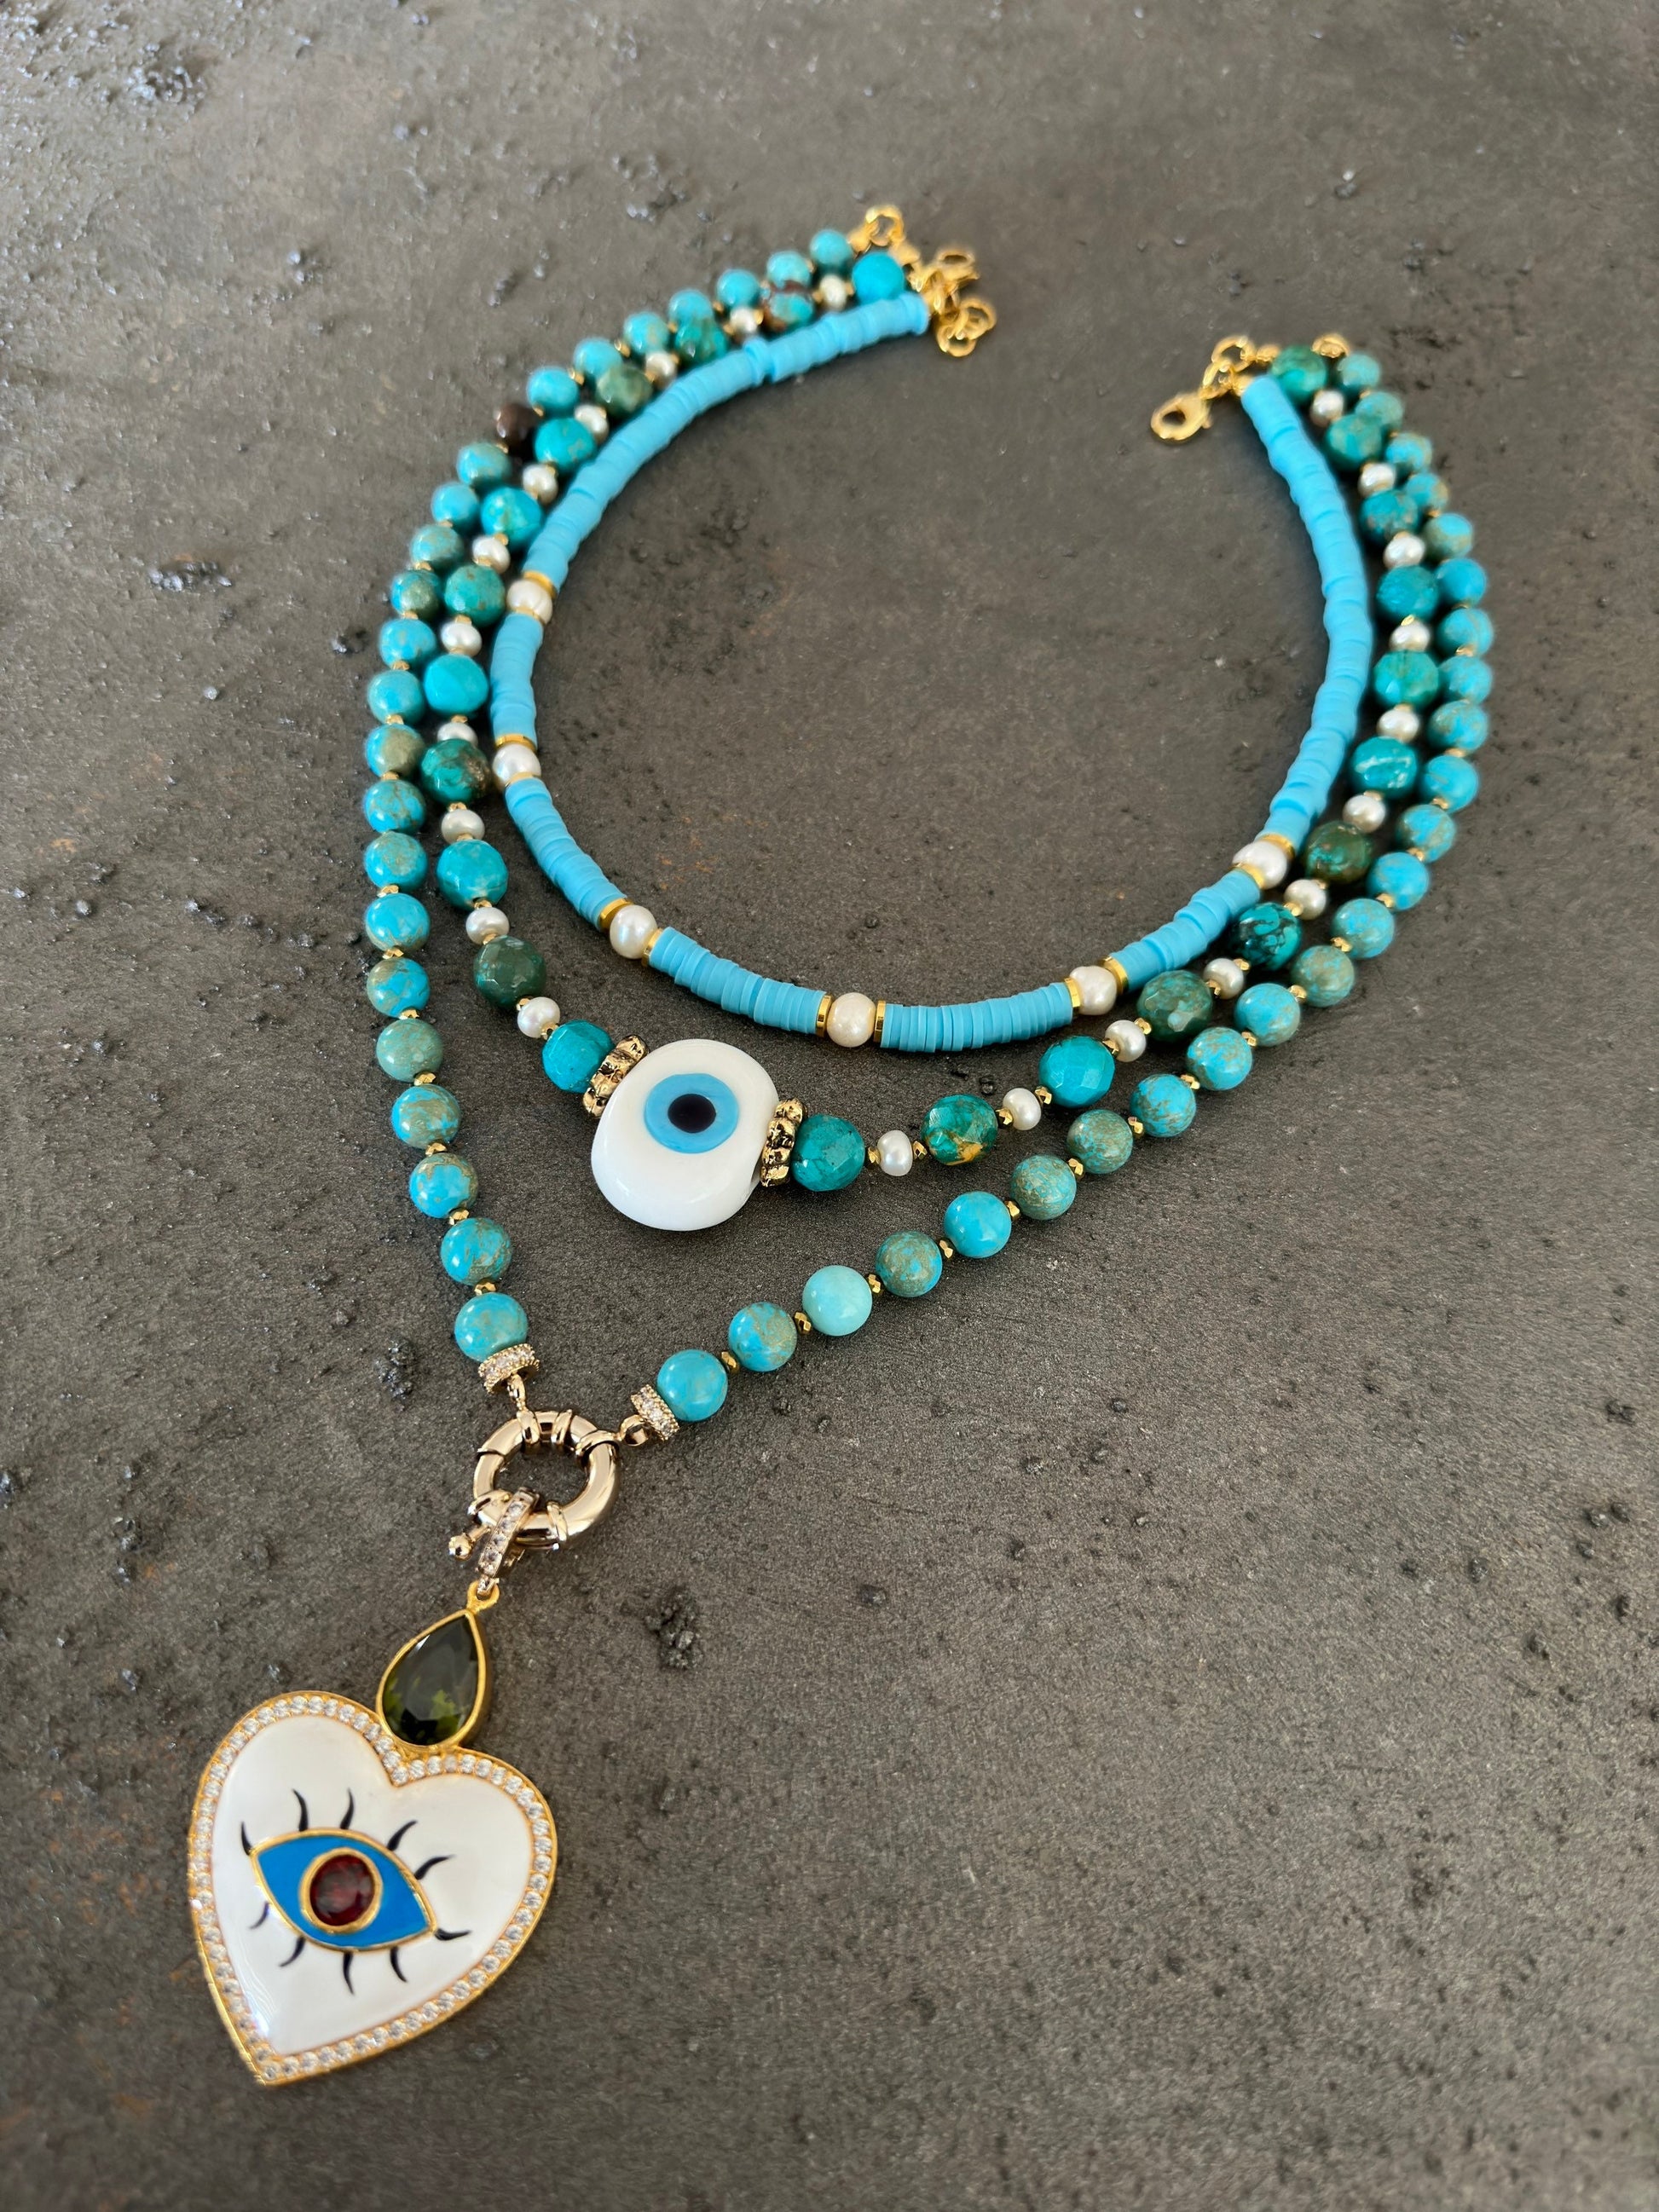 Summer Necklace, Fimo Bead Necklace, Evil Eye Pendant Jewelry for Her, Multistrand Layered Necklace for Gifts